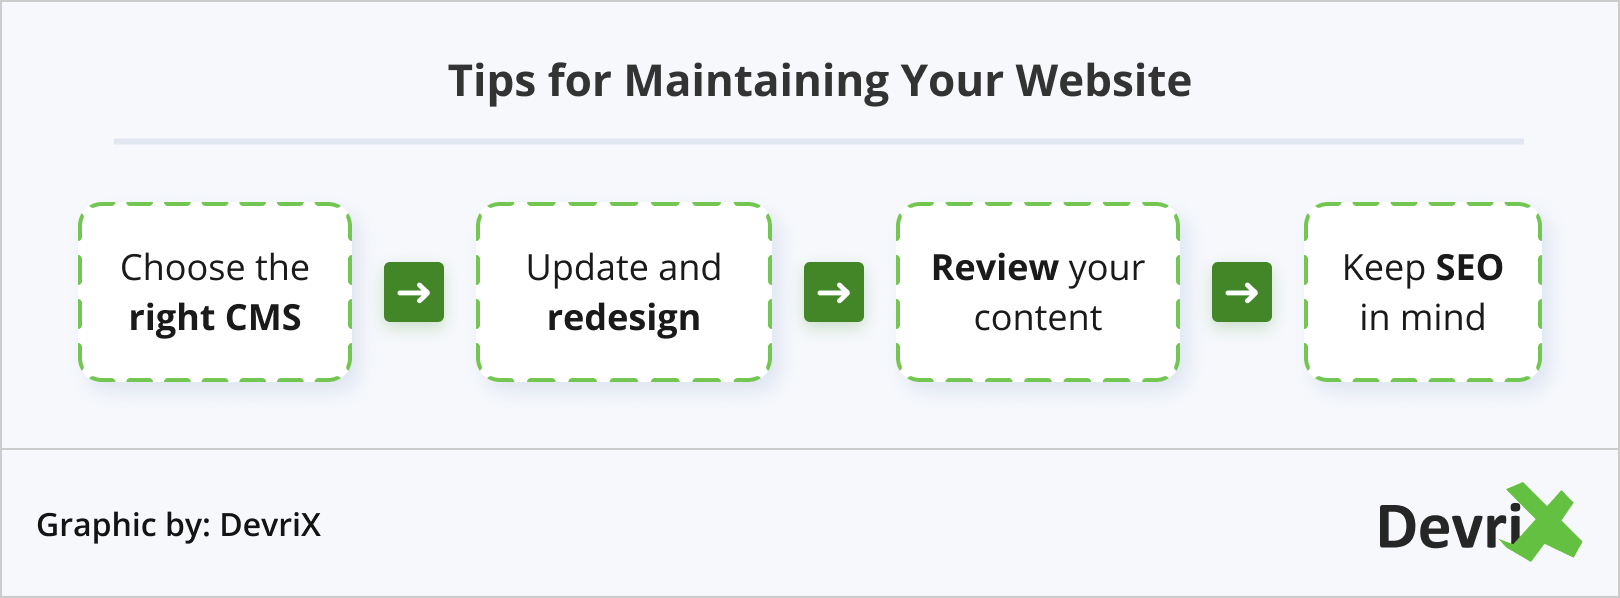 Tips for Maintaining Your Website